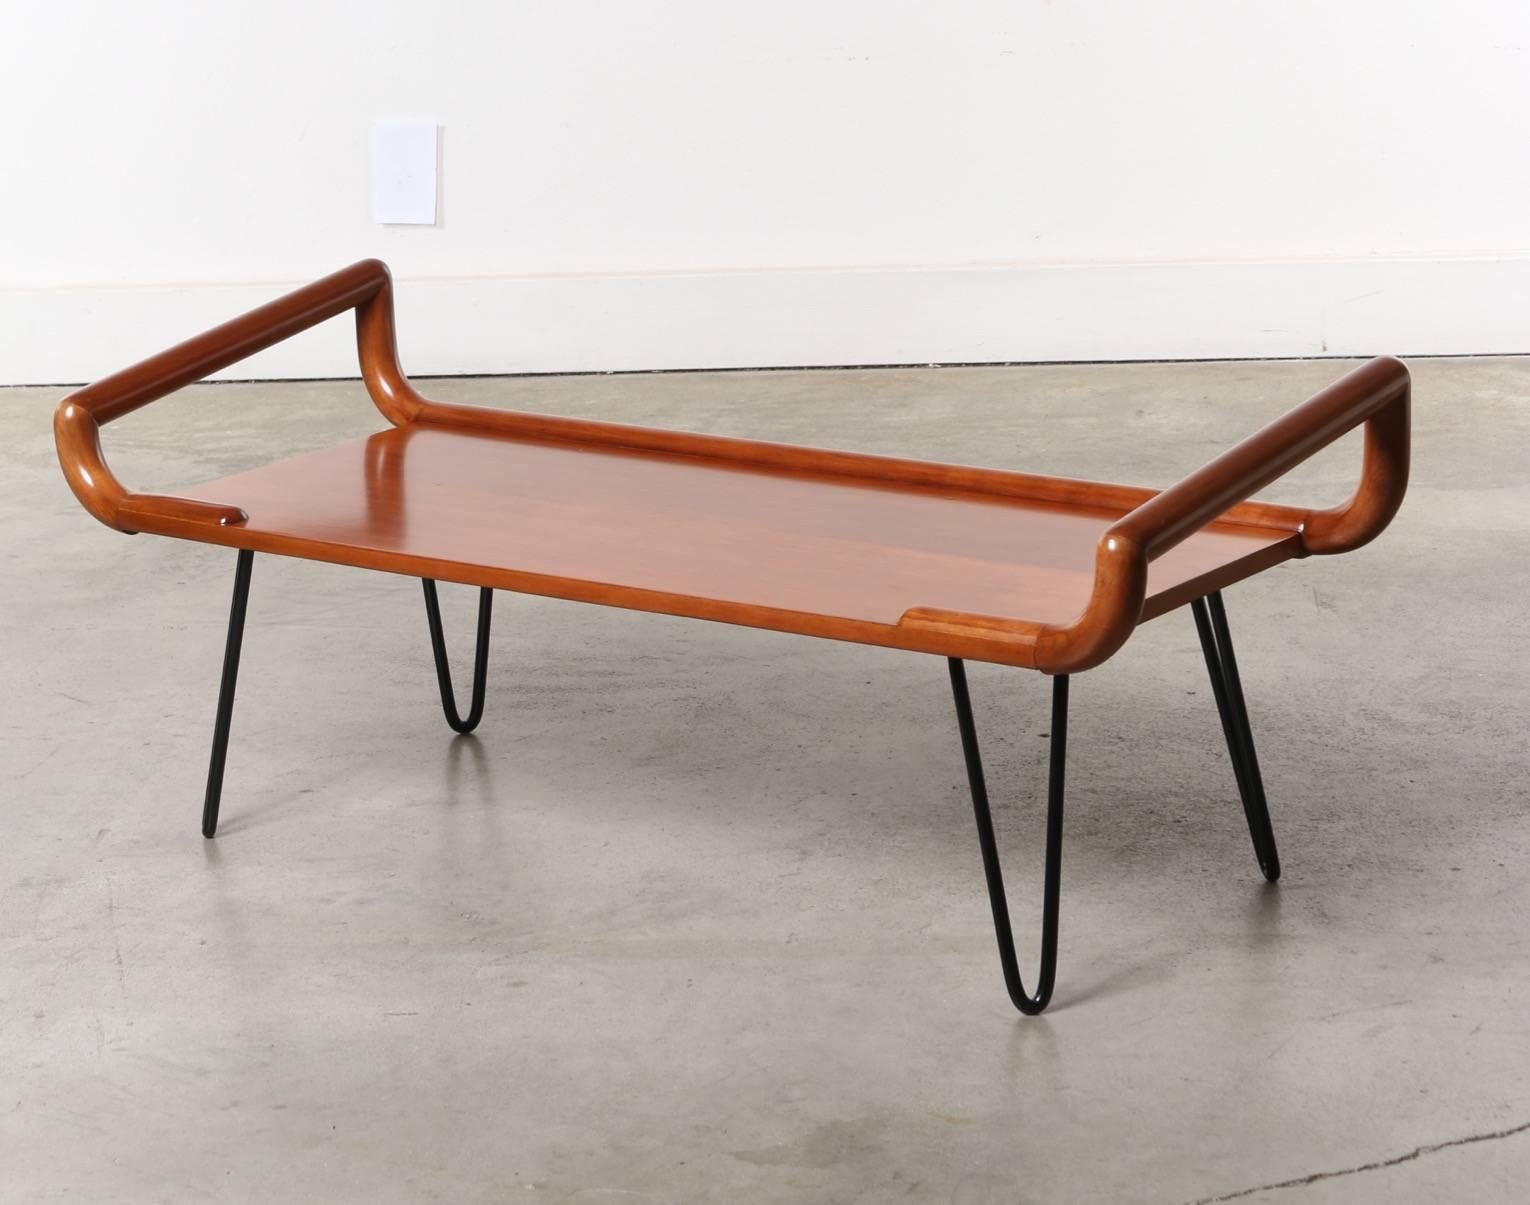 Unique form and quality craftsmanship are combined in this multi functional bench. Solidly supported by metal hairpin legs this piece has handles that would border a cushion or blanket, a perfect entry way, occasional bench or bottom of the bed